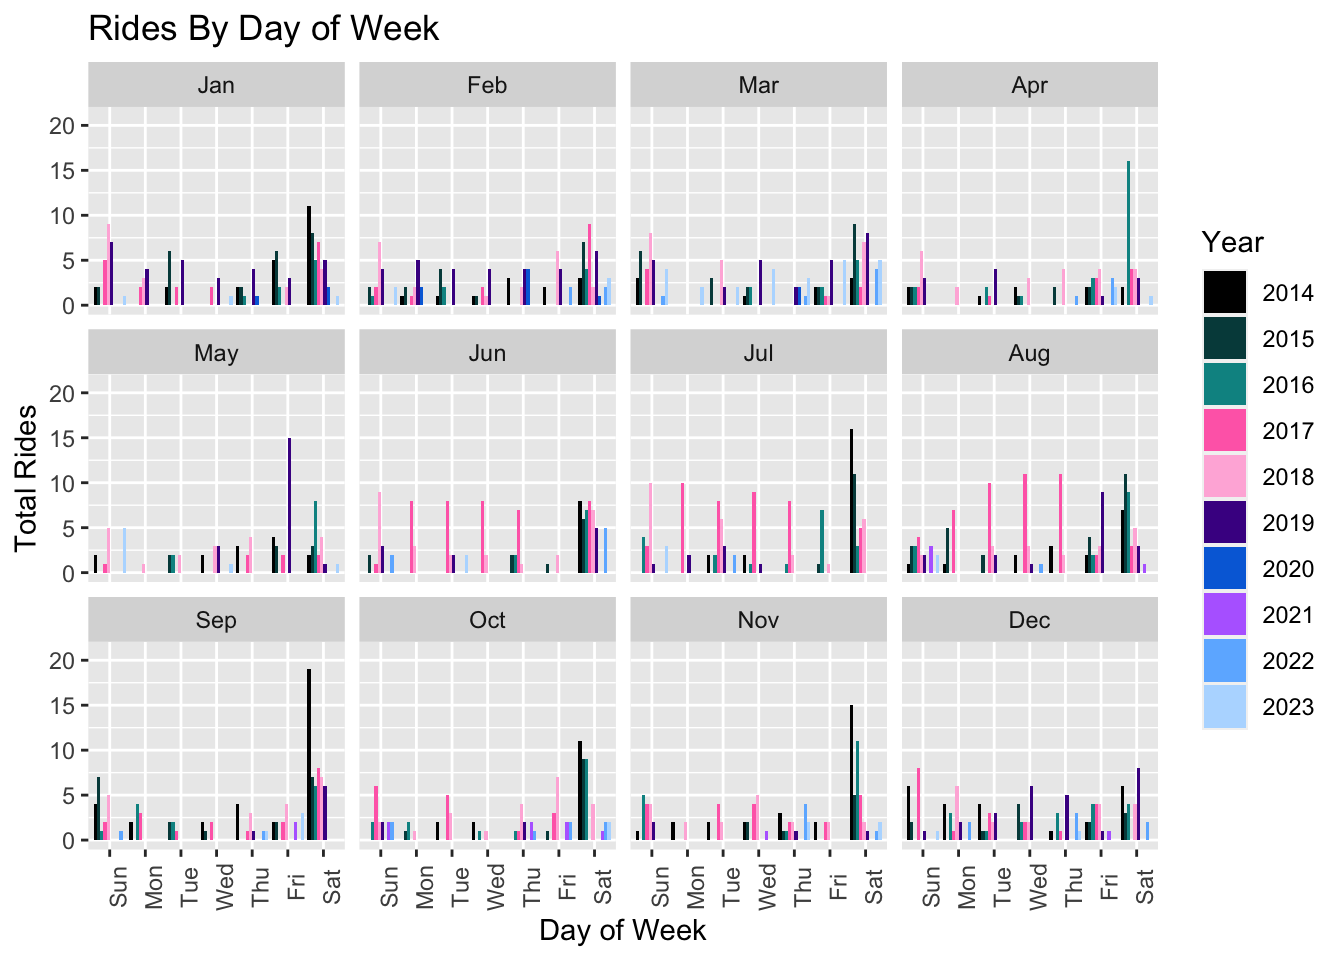 Year-over-year Rides by Day of Week and Month